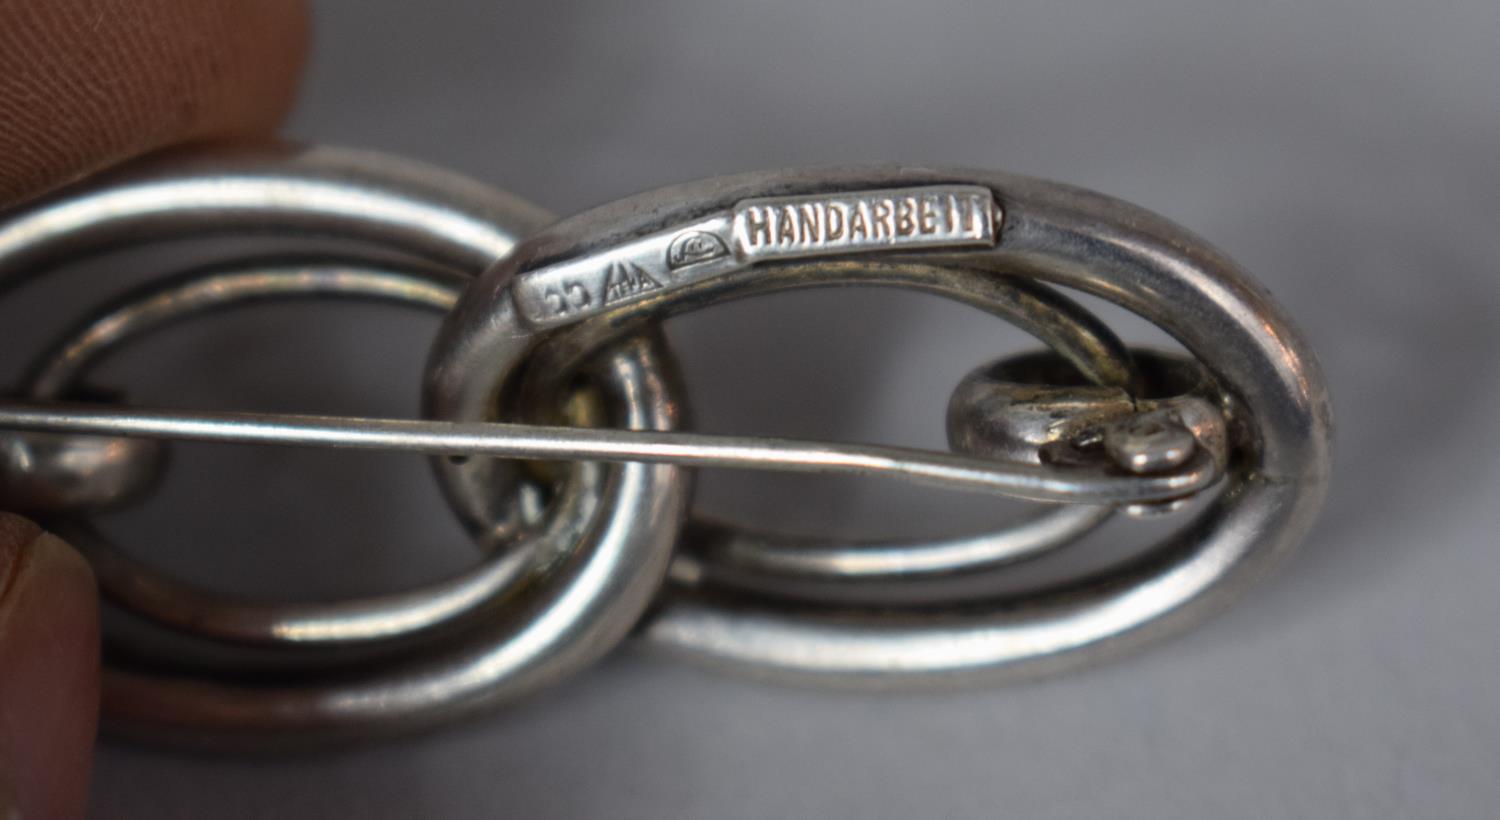 A German Silver Brooch by Handarbeit in the Form of Interlocking Links - Image 2 of 2